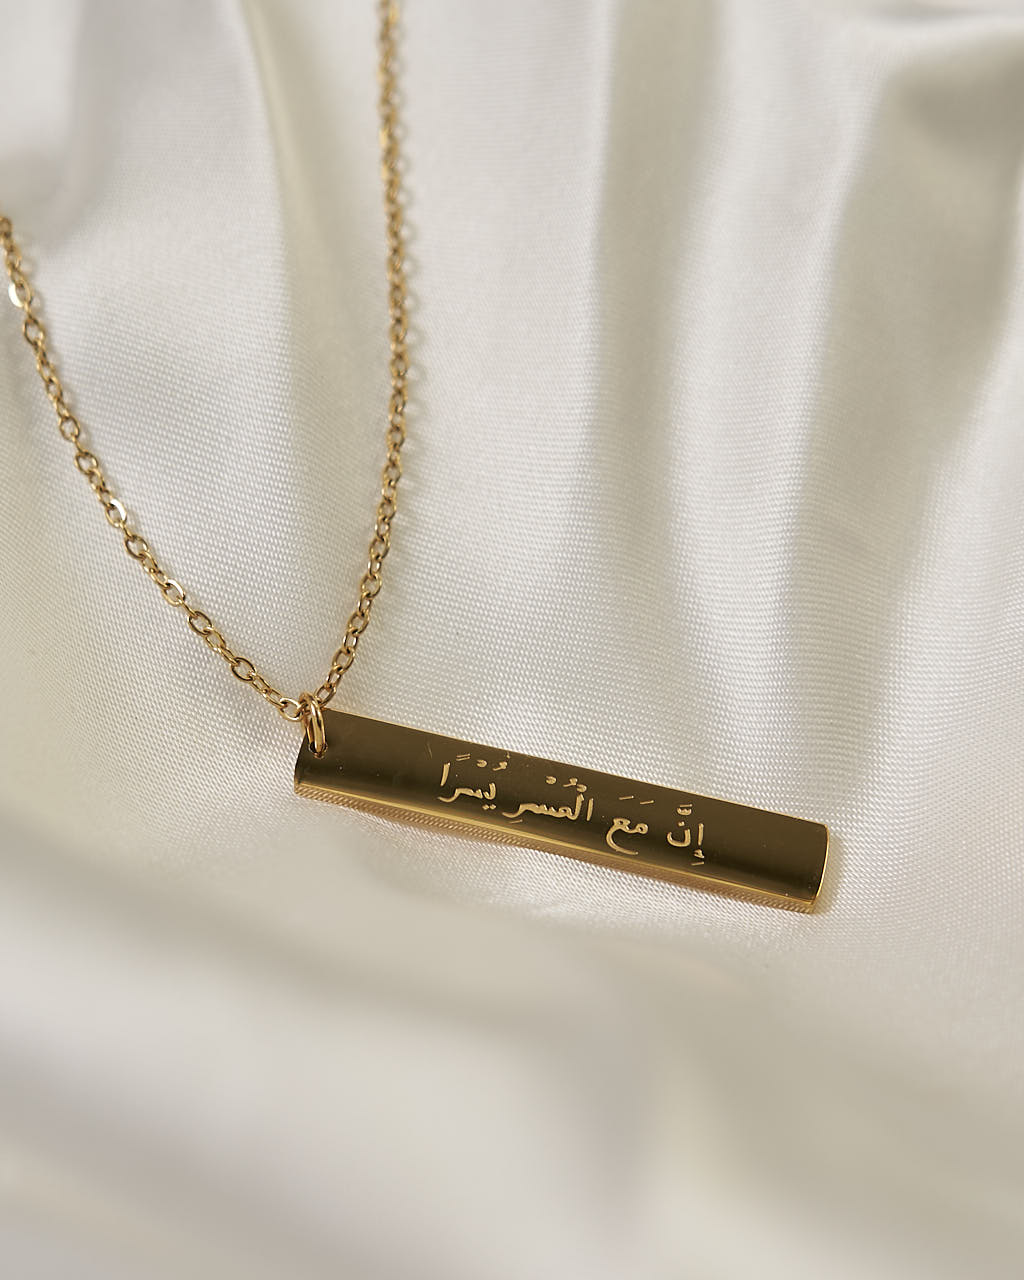 "Verily, with hardship comes ease" Necklace - Necklace - Fajr Noor